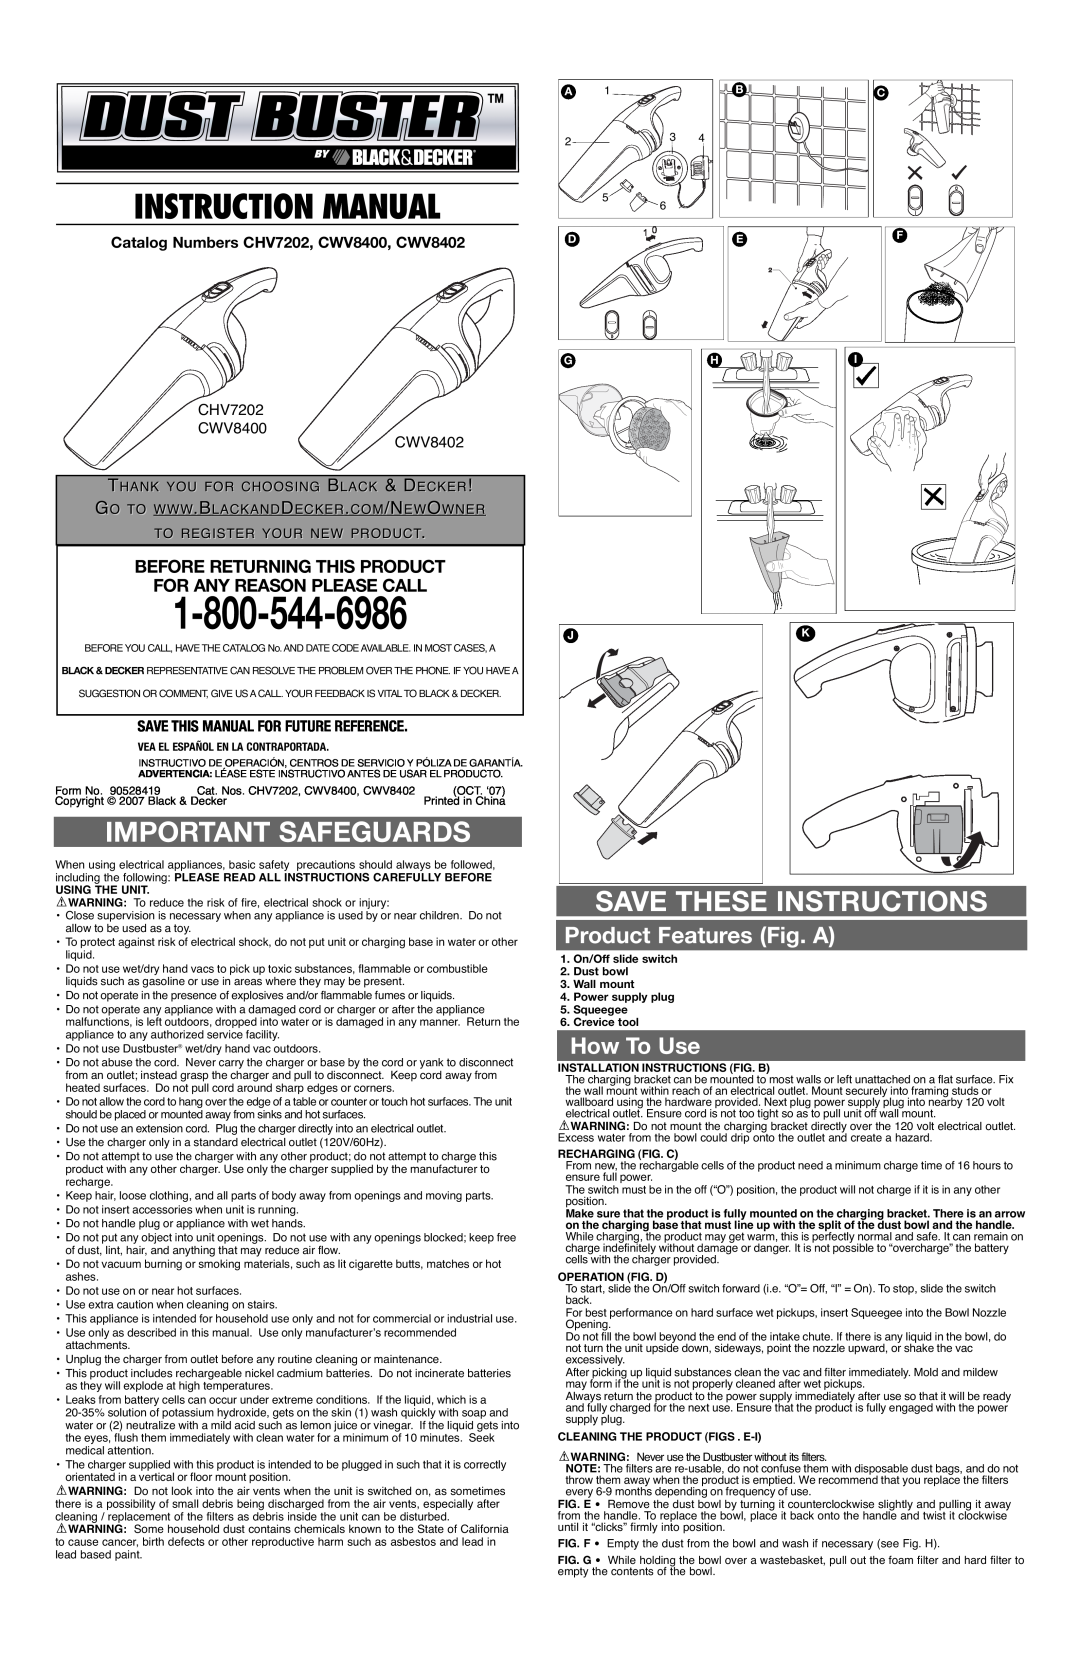 Black & Decker CWV8402, CWV8400 instruction manual Important Safeguards, Save These Instructions, Product Features Fig. A 